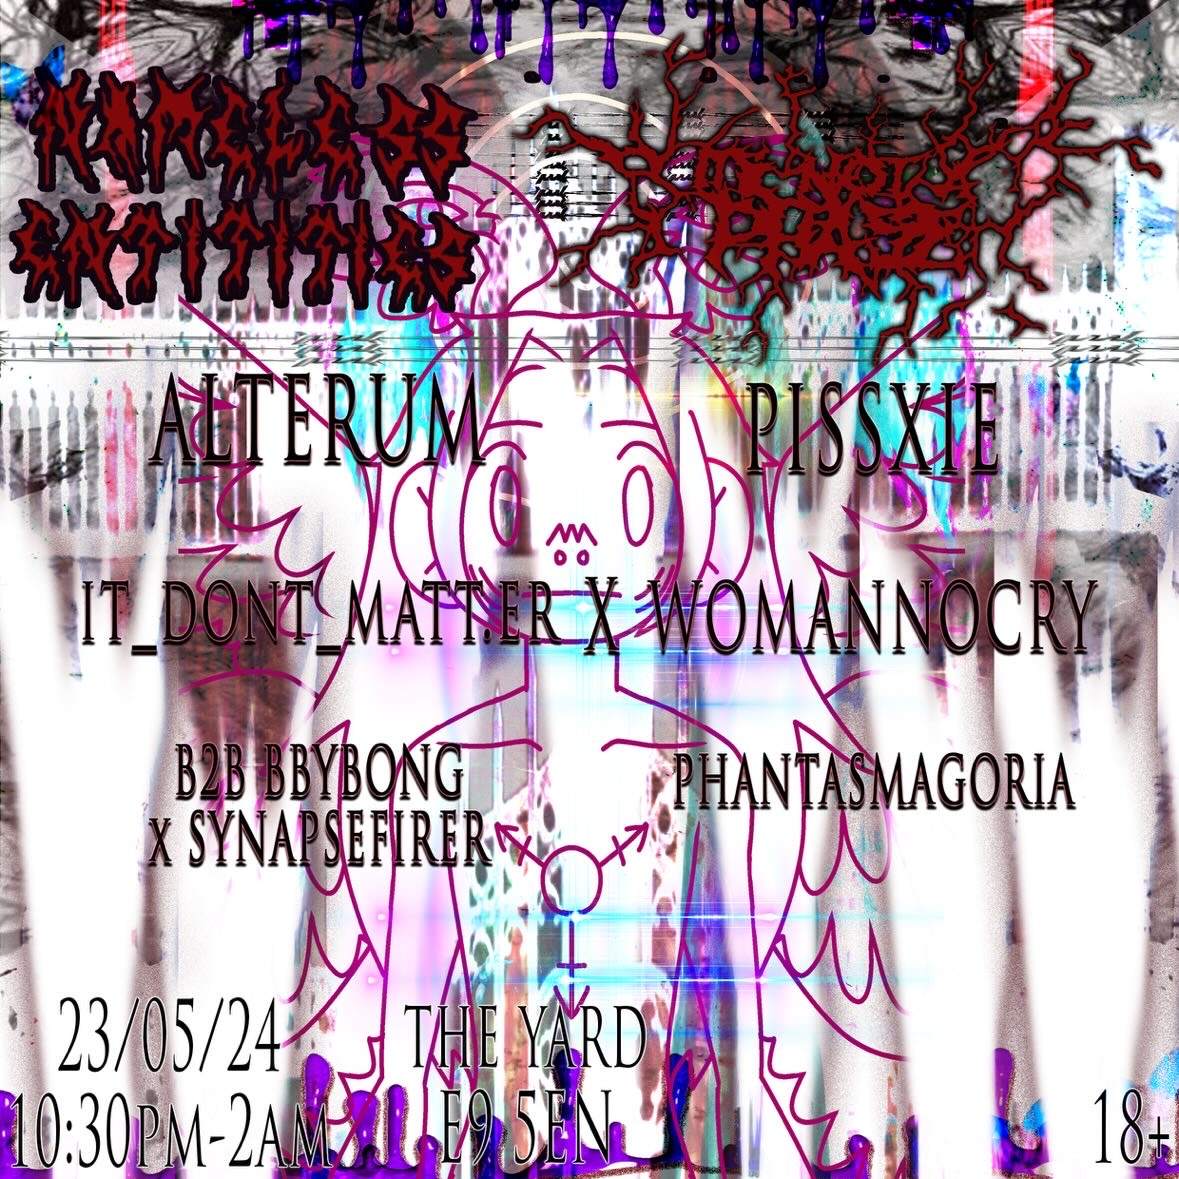 Nameless Entities X its not a phase - 23/05 - Página frontal